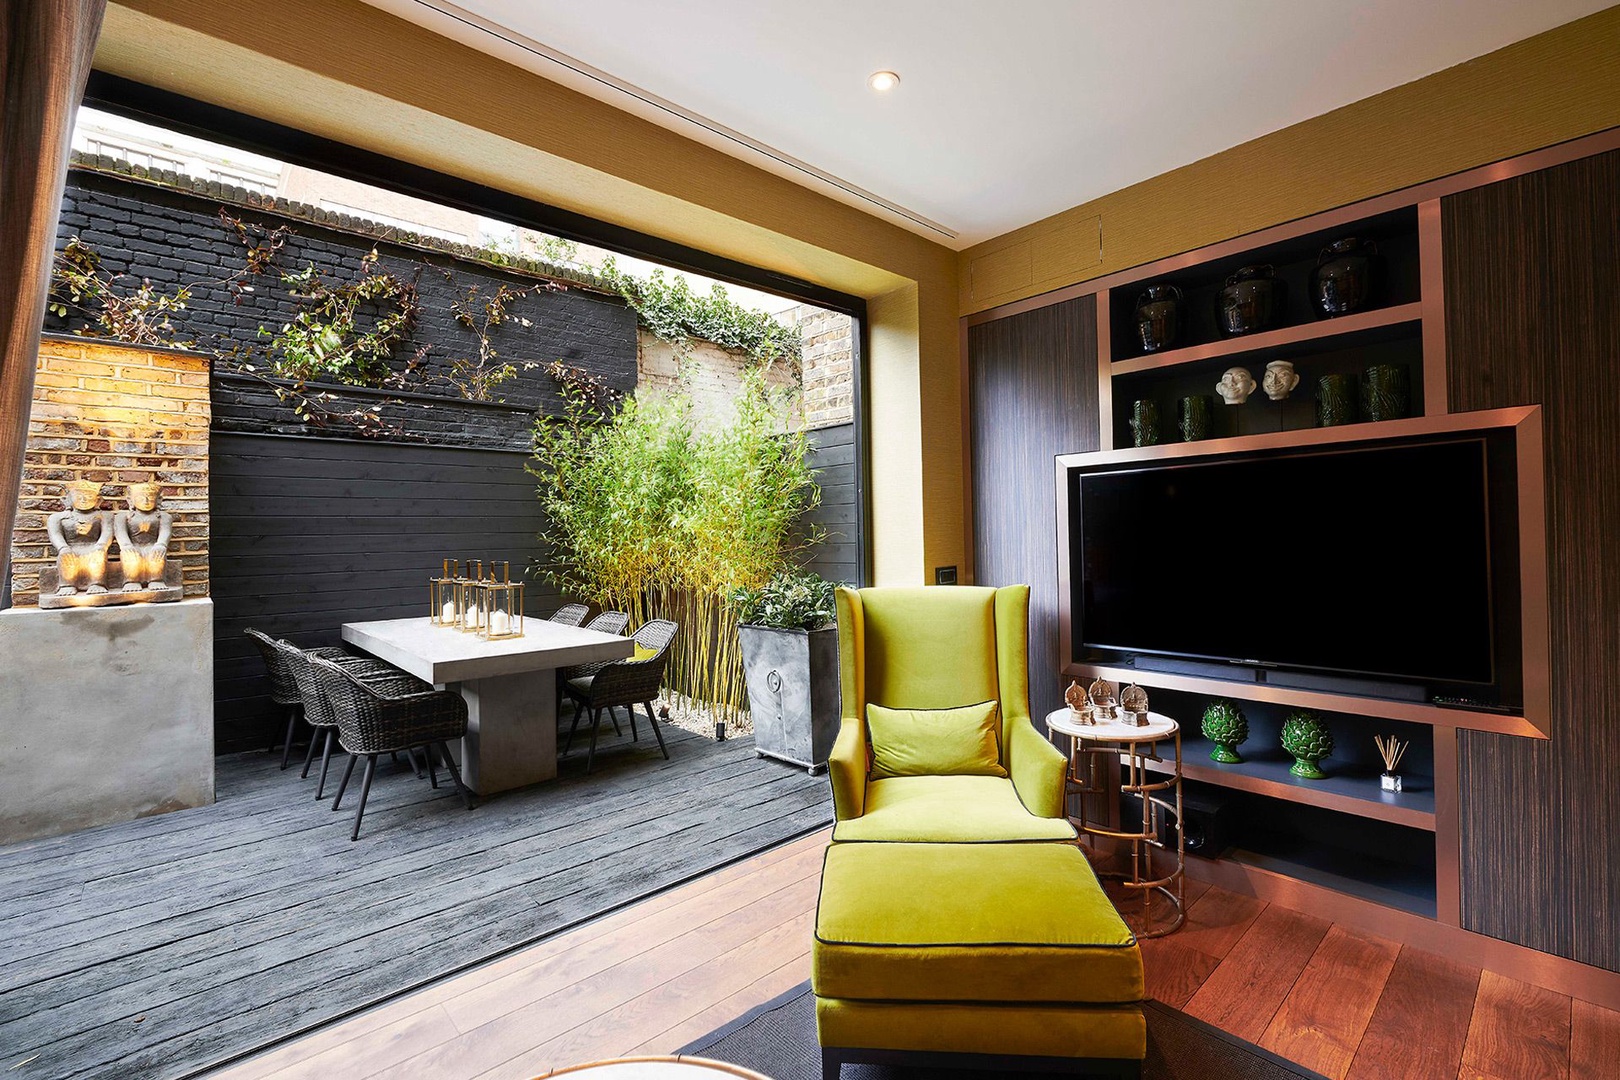 Sumptuous second living room opens onto a private patio